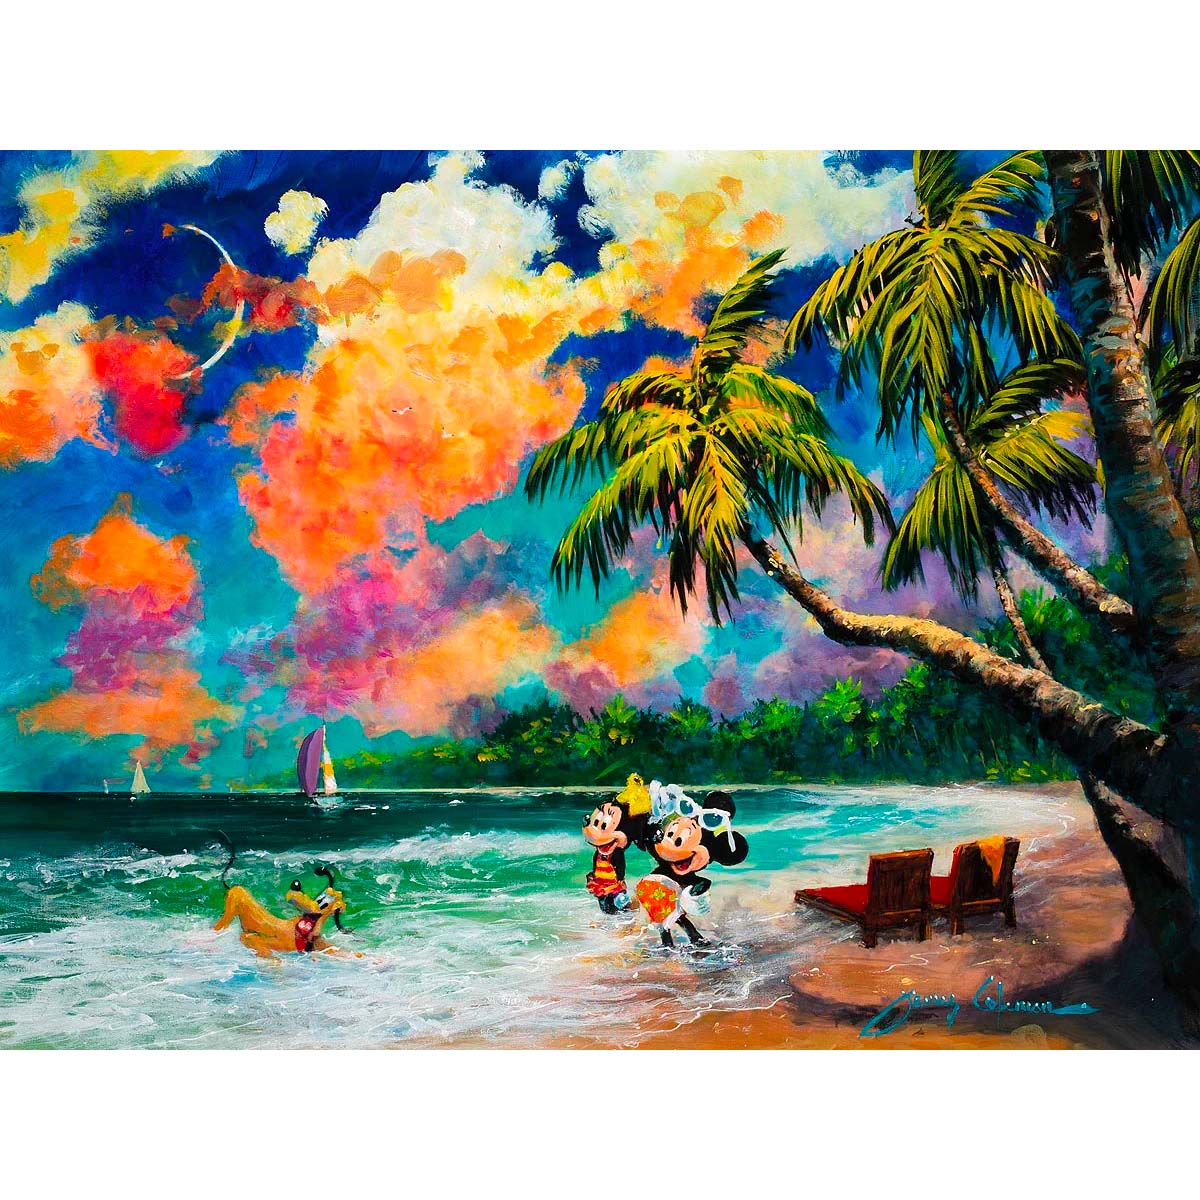 James Coleman Disney "Together in Paradise" Limited Edition Canvas Giclee